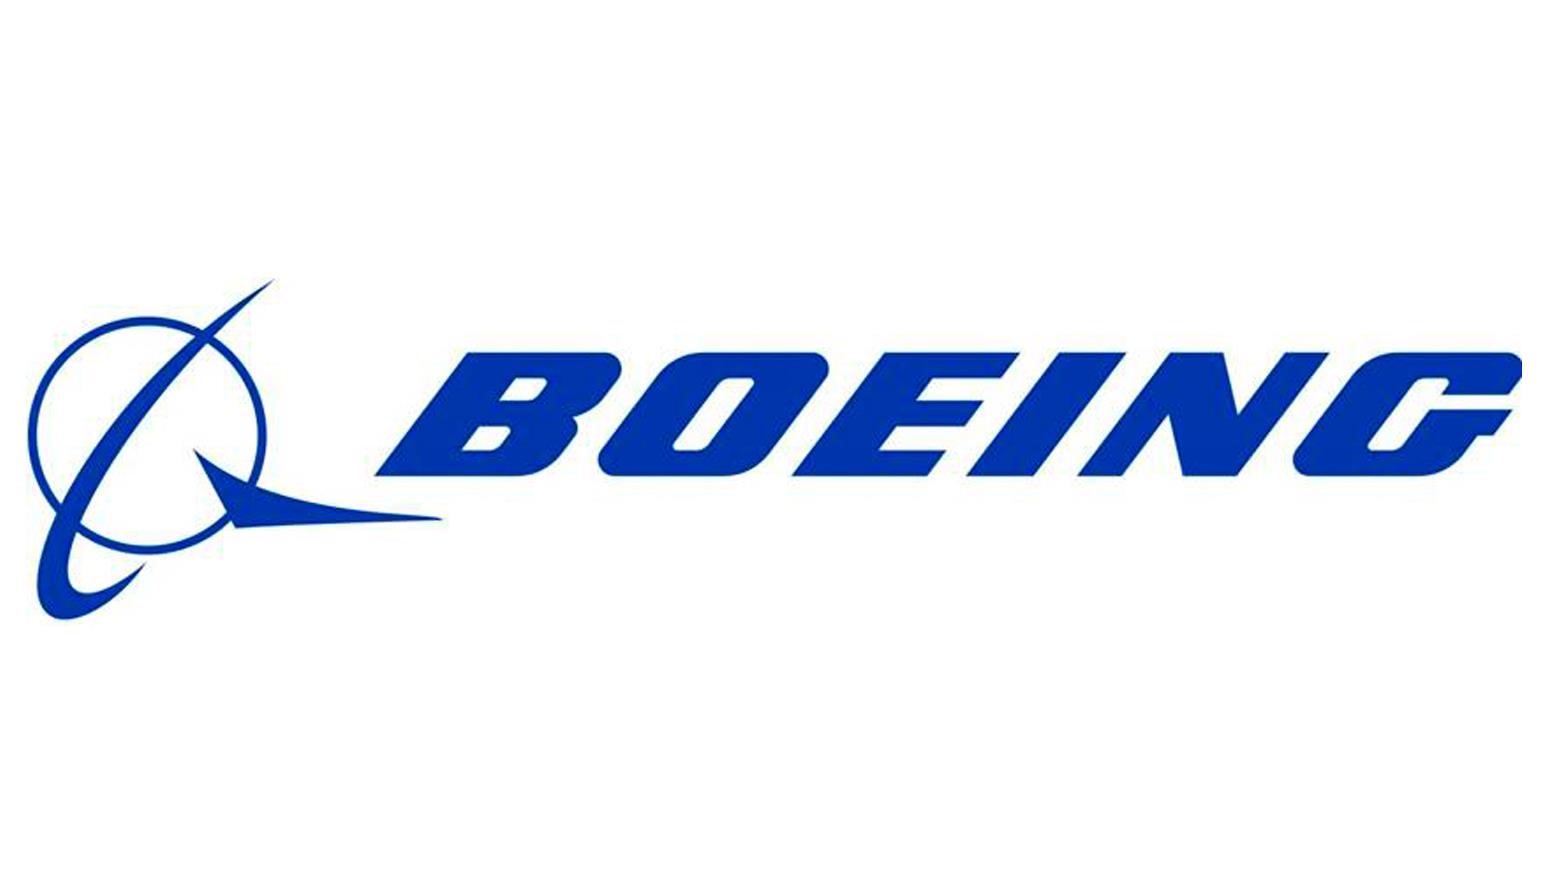 BOEING Aircraft For Sale in LAKELAND, 1 Listings